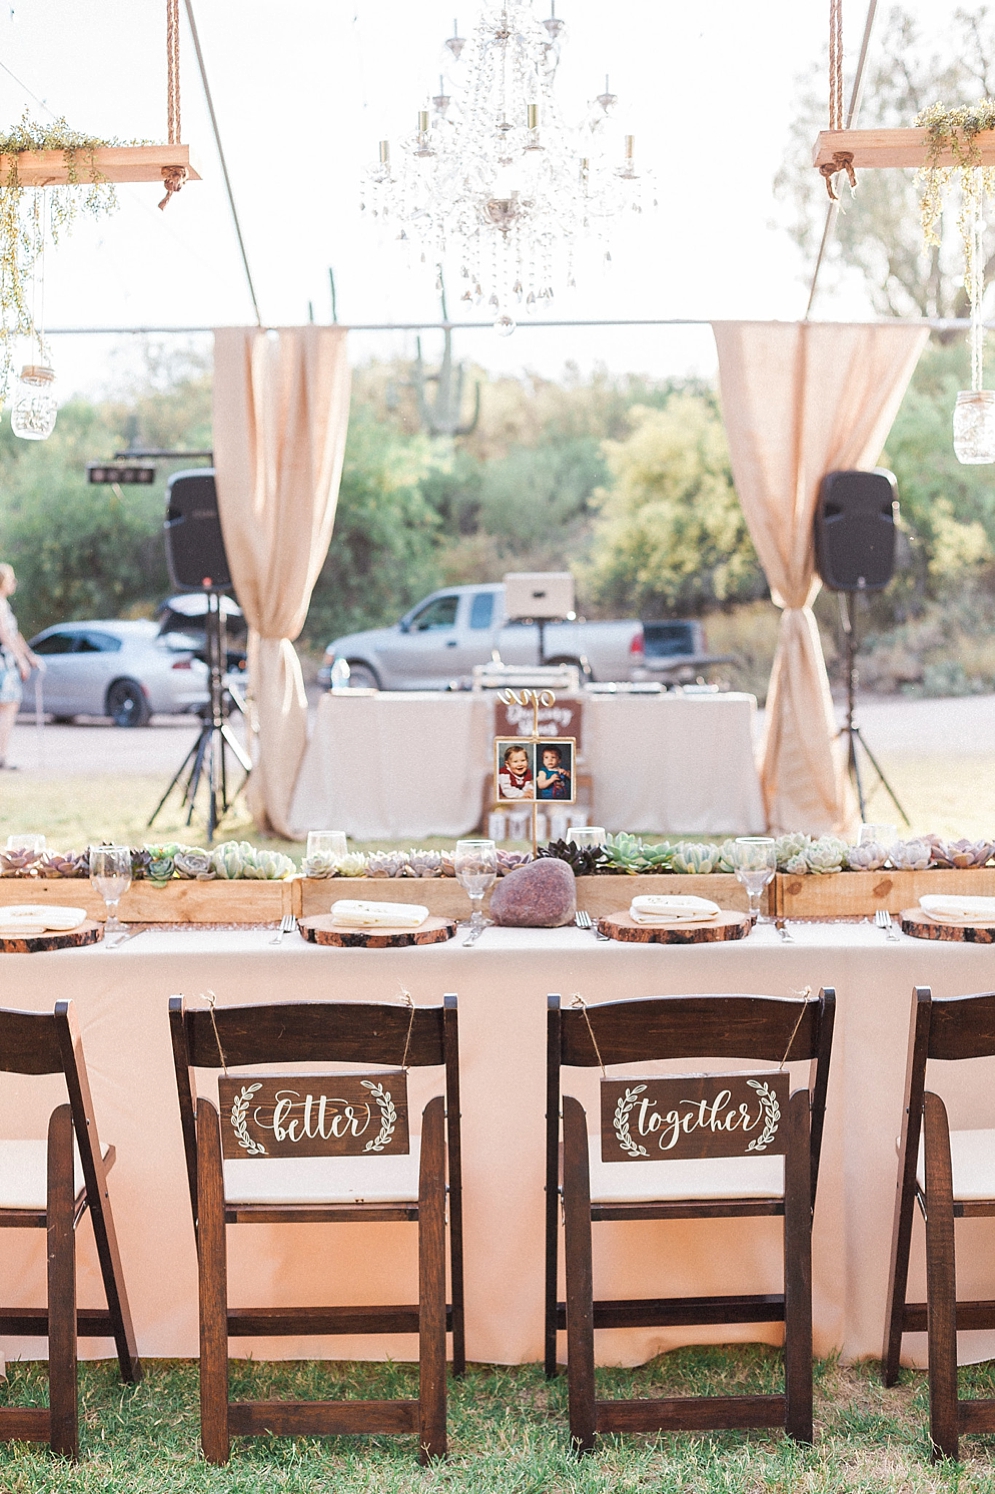 Wedding Wood Decorations to Incorporate | St. Louis Wedding Photographer | Saguaro Lake Guest Ranch Wedding | sweetheart table seating signs